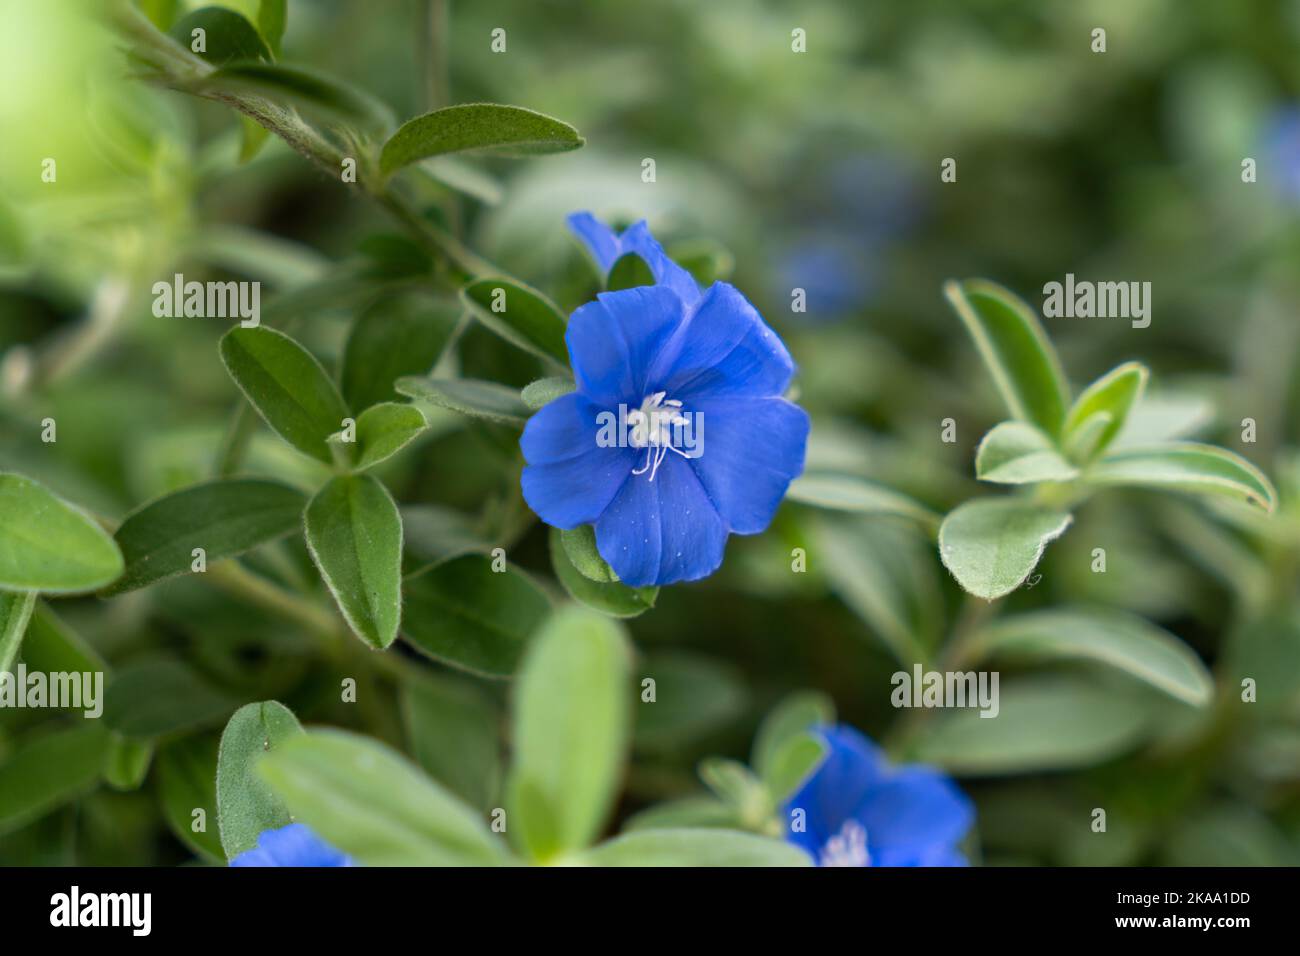 A selective focus shot of a blue dwarf morning glory flower Stock Photo